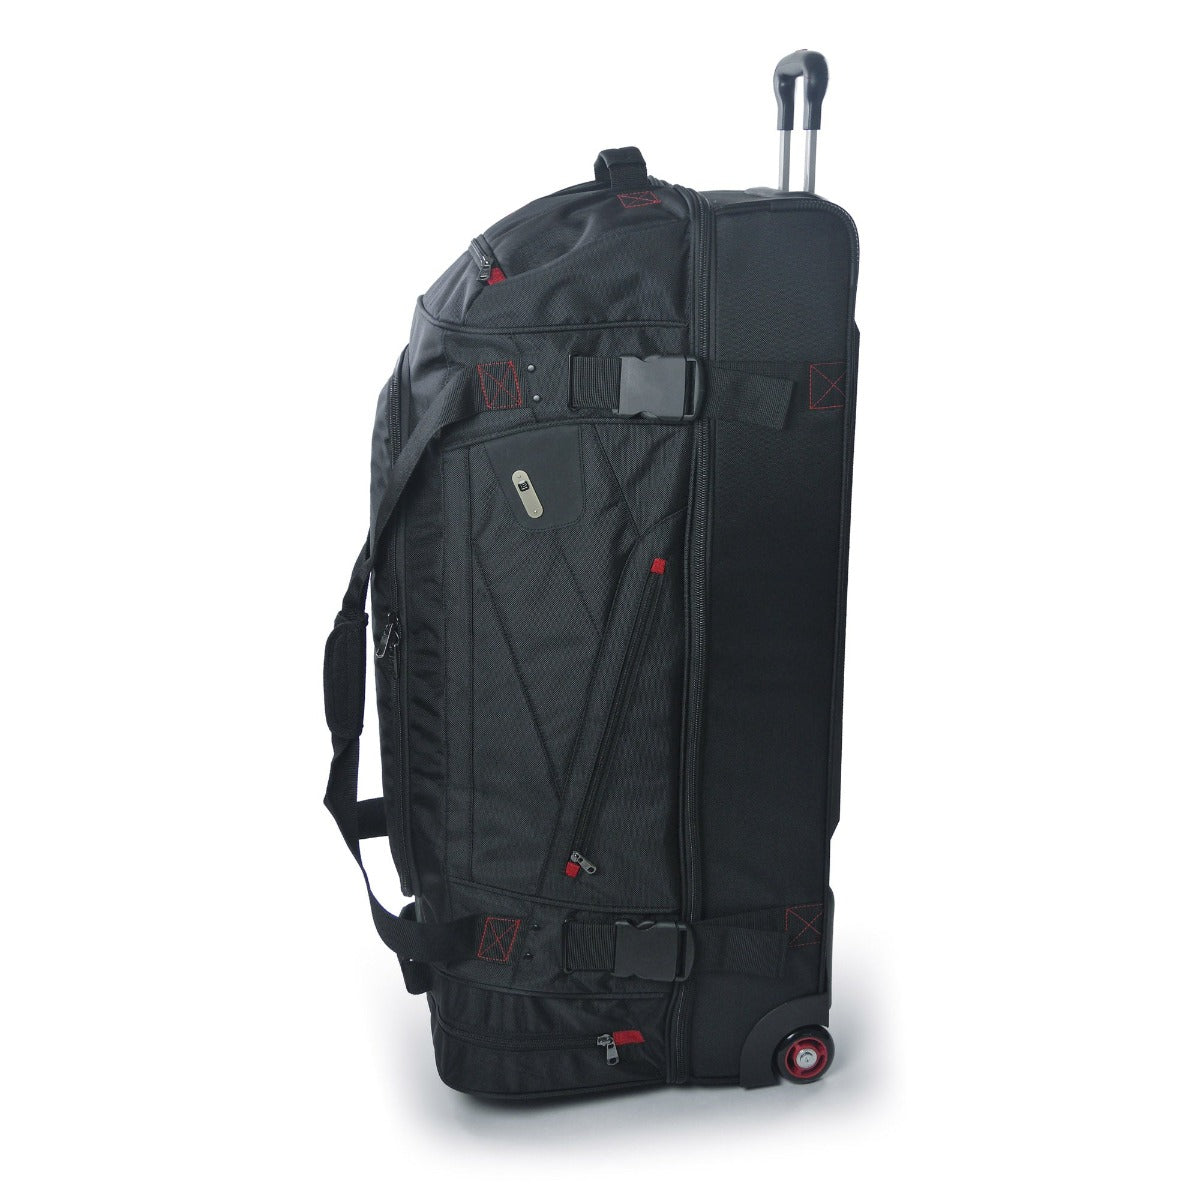 Tour Manager 36-inch oversized black wheeled rolling bag for traveling